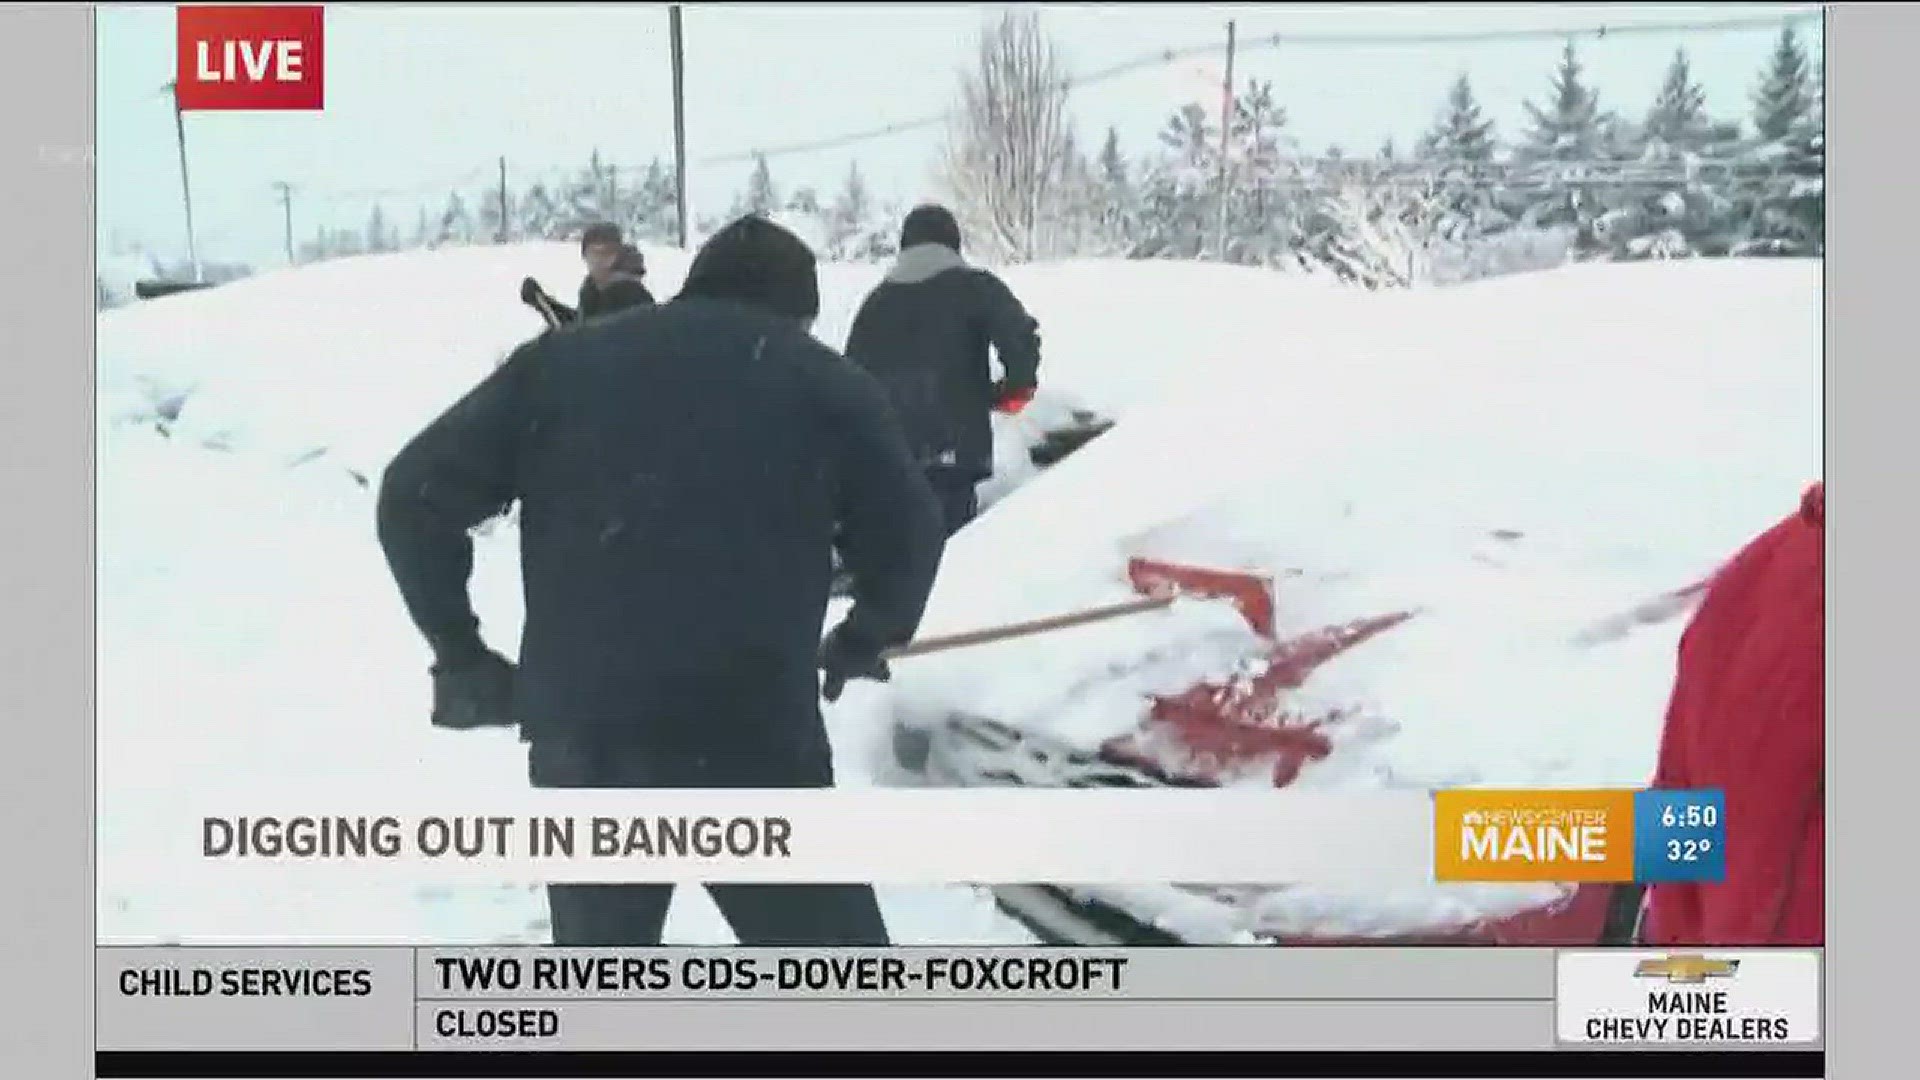 Storm Coverage: Zach Blanchard reports on digging out in Bangor